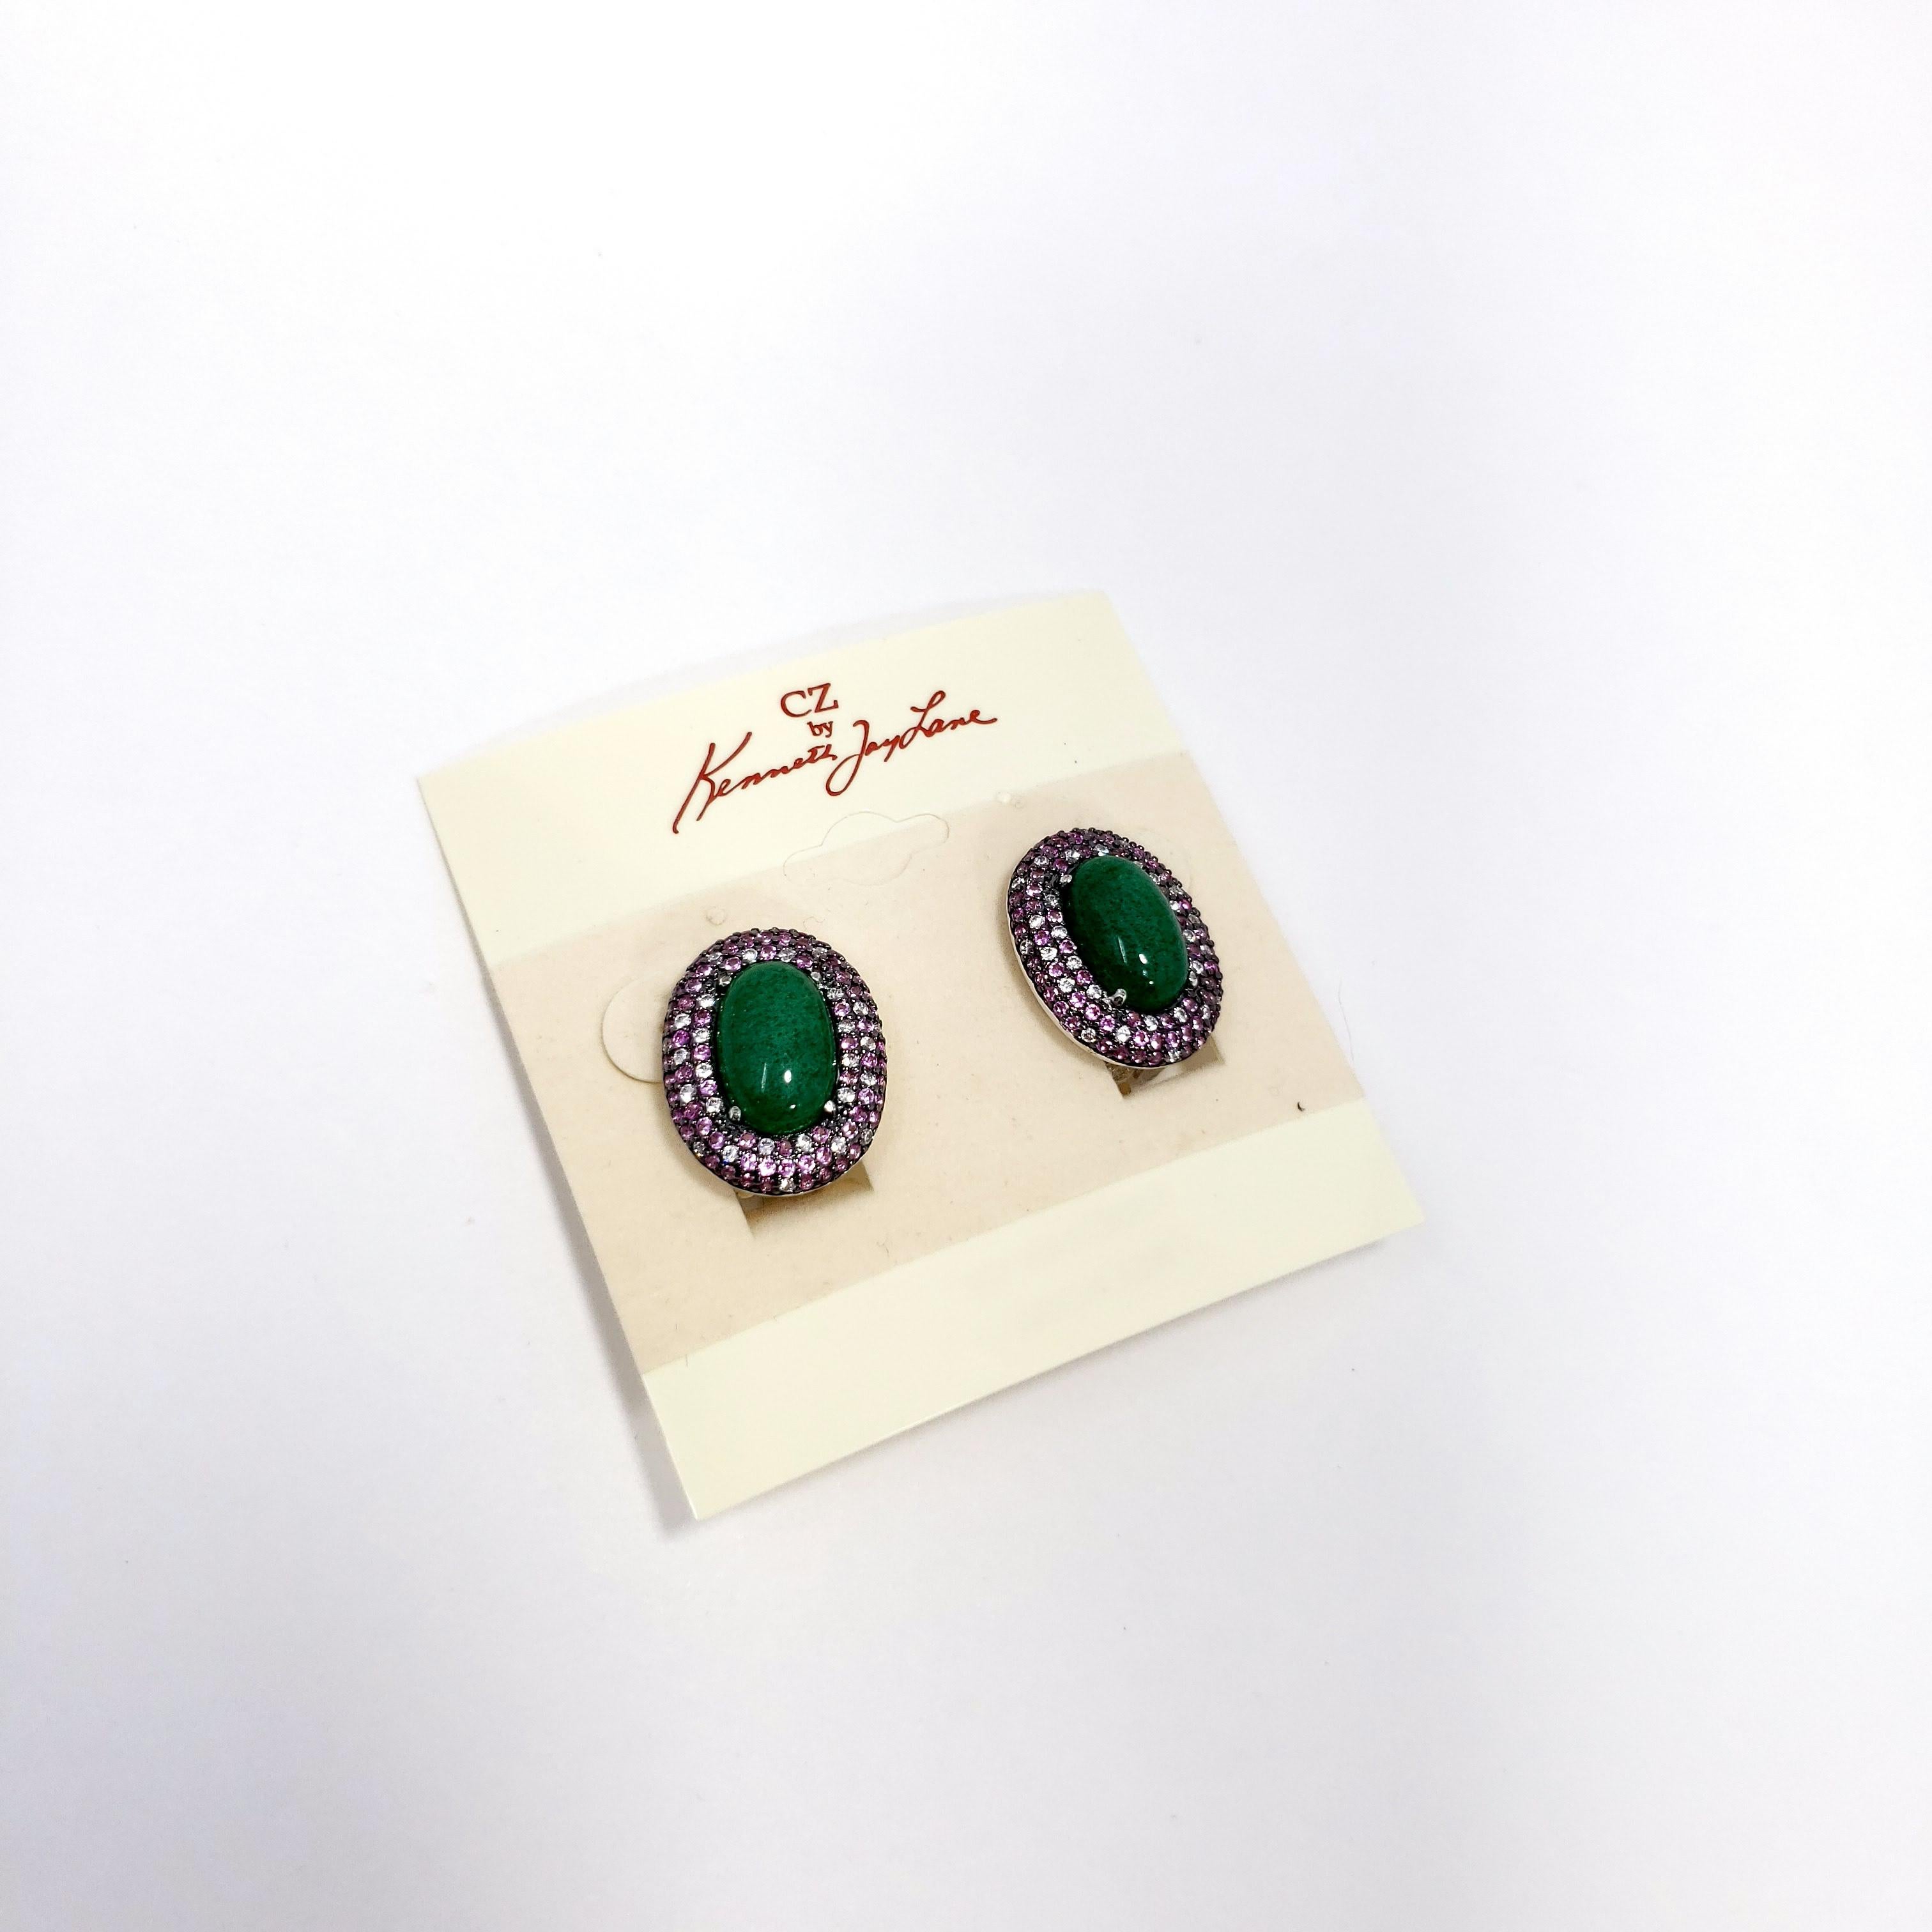 Stylish clip-on earrings by Kenneth Jay Lane! Each silvertone earring  features a single green cabochon, accented with rose and clear cubic zirconia crystals.

Hallmarks: KJL